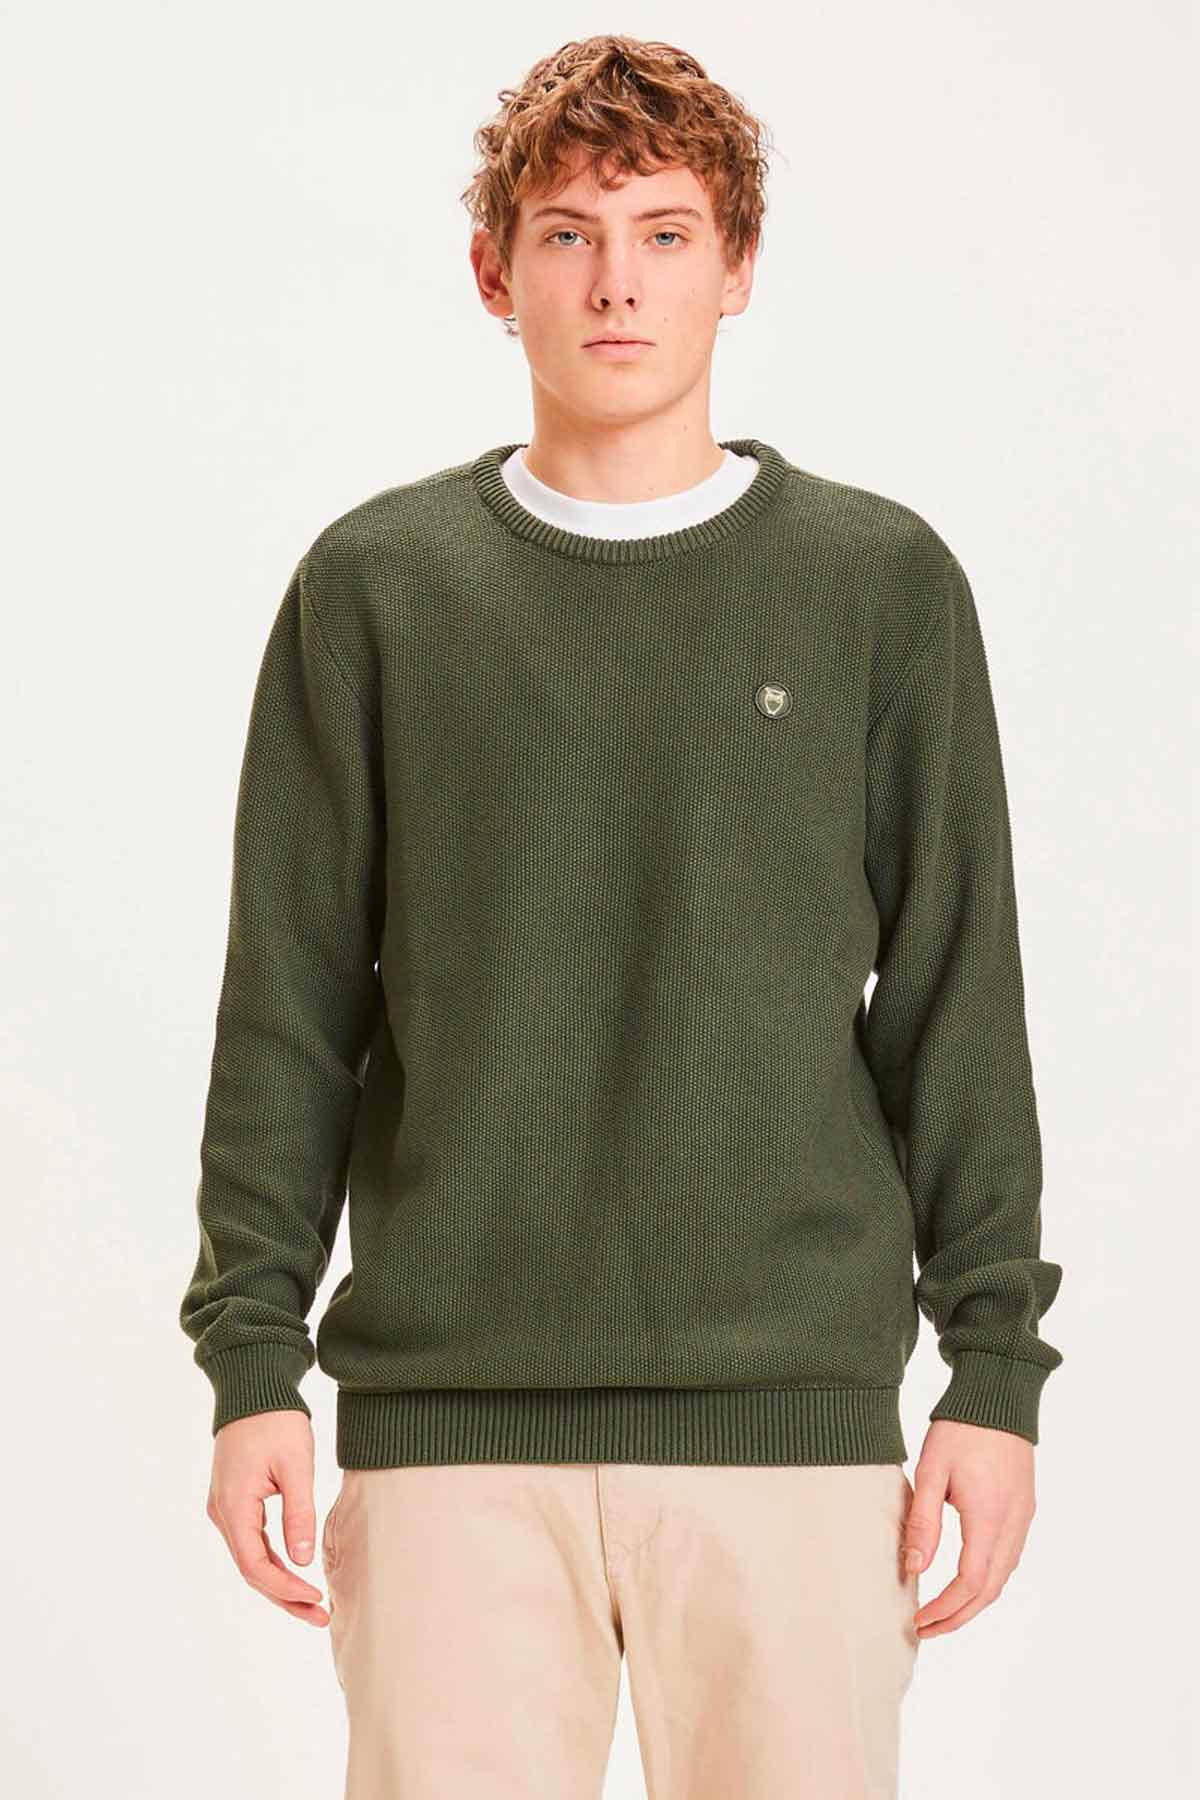 Pull Pique badge knit o-neck - Knowledge Cotton Apparel